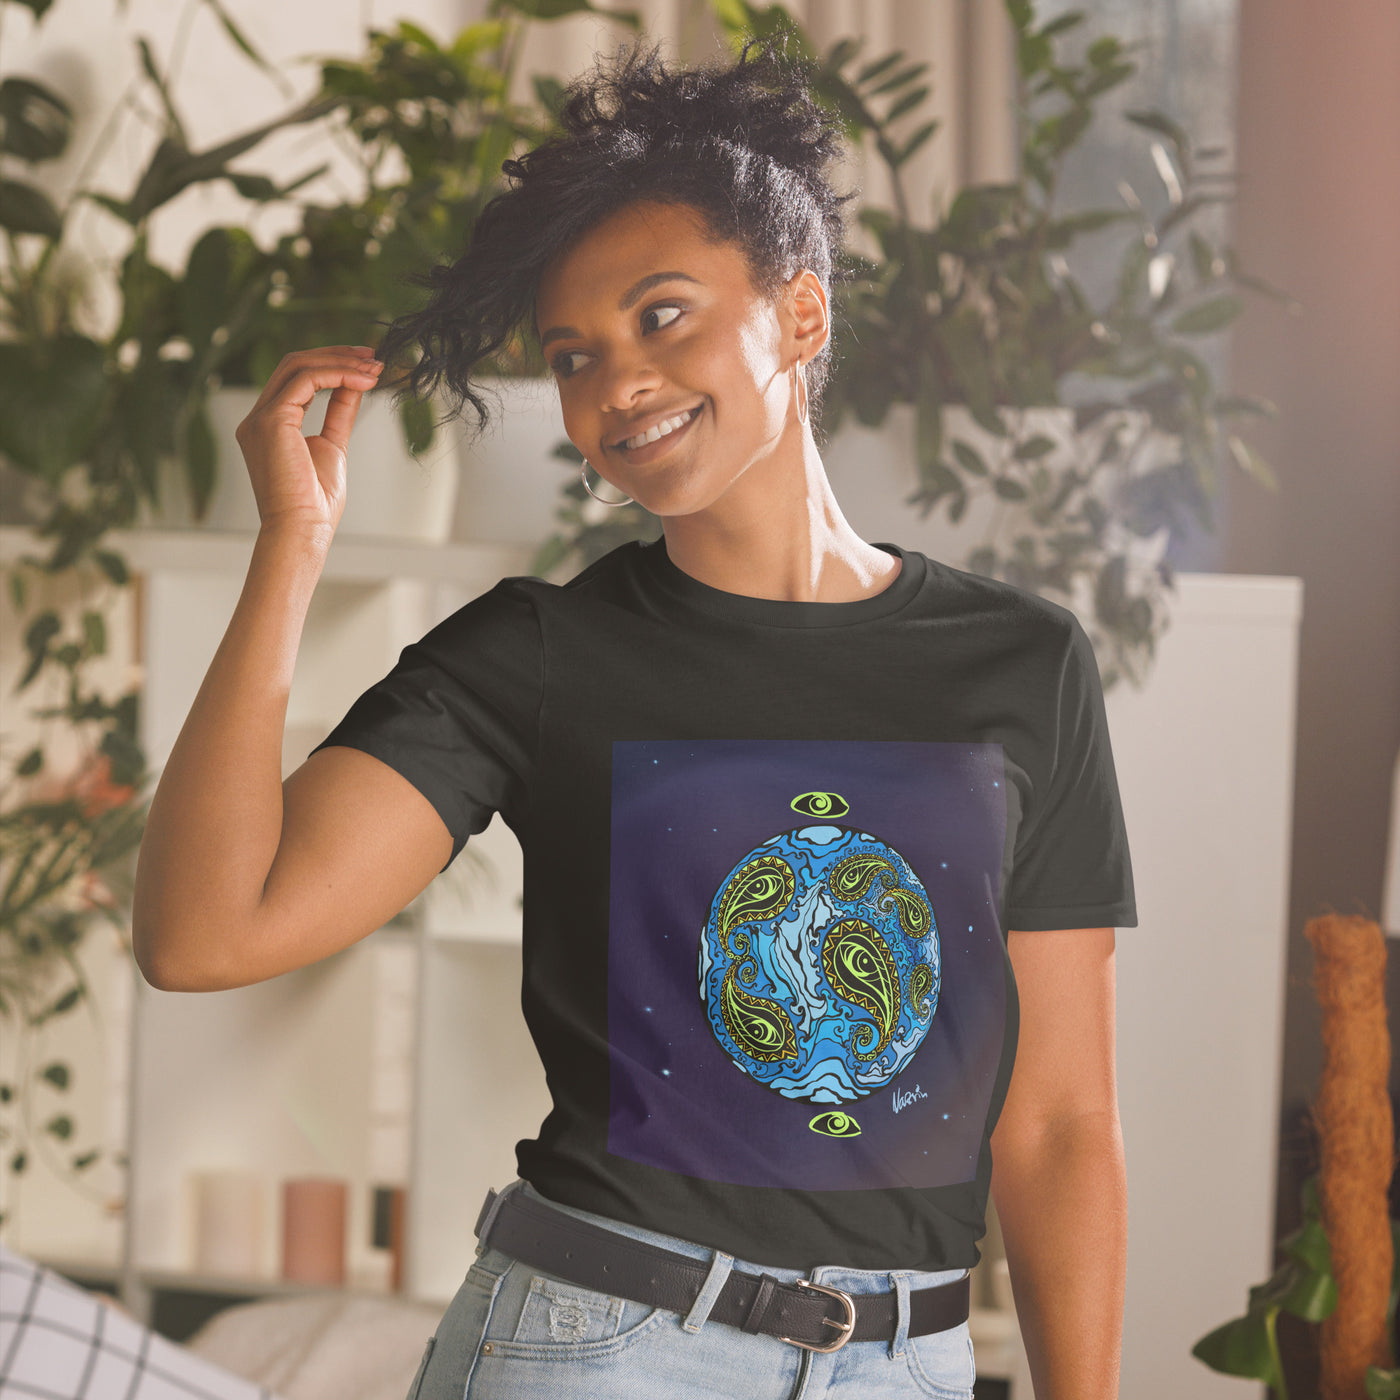 "Planet Earth and Cosmos" Unisex T-Shirt